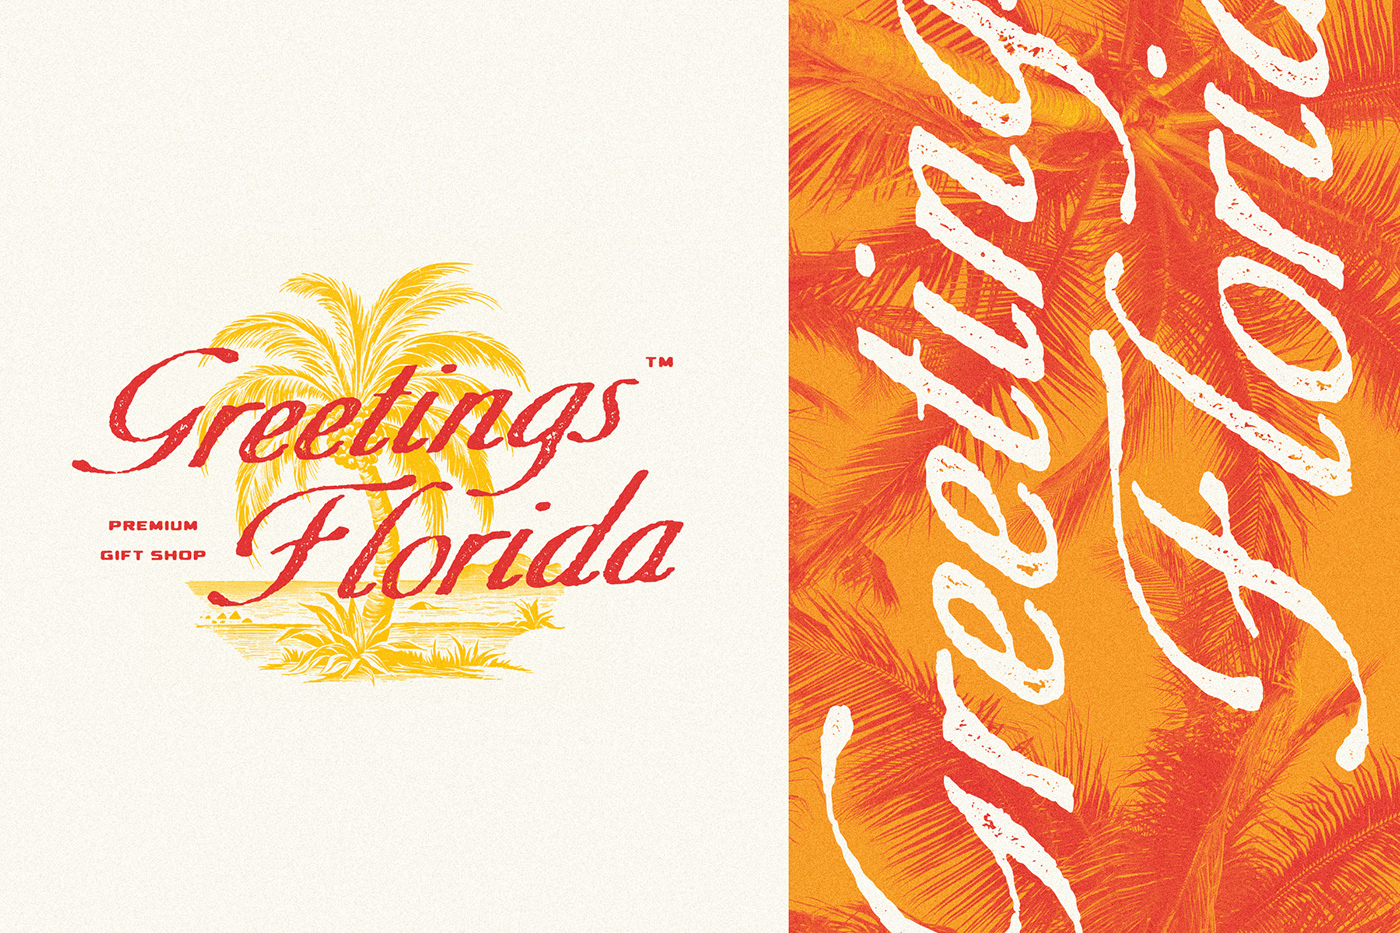 A vintage inspired tropical logo for a gift shop in Florida - Using the free to download font trio.